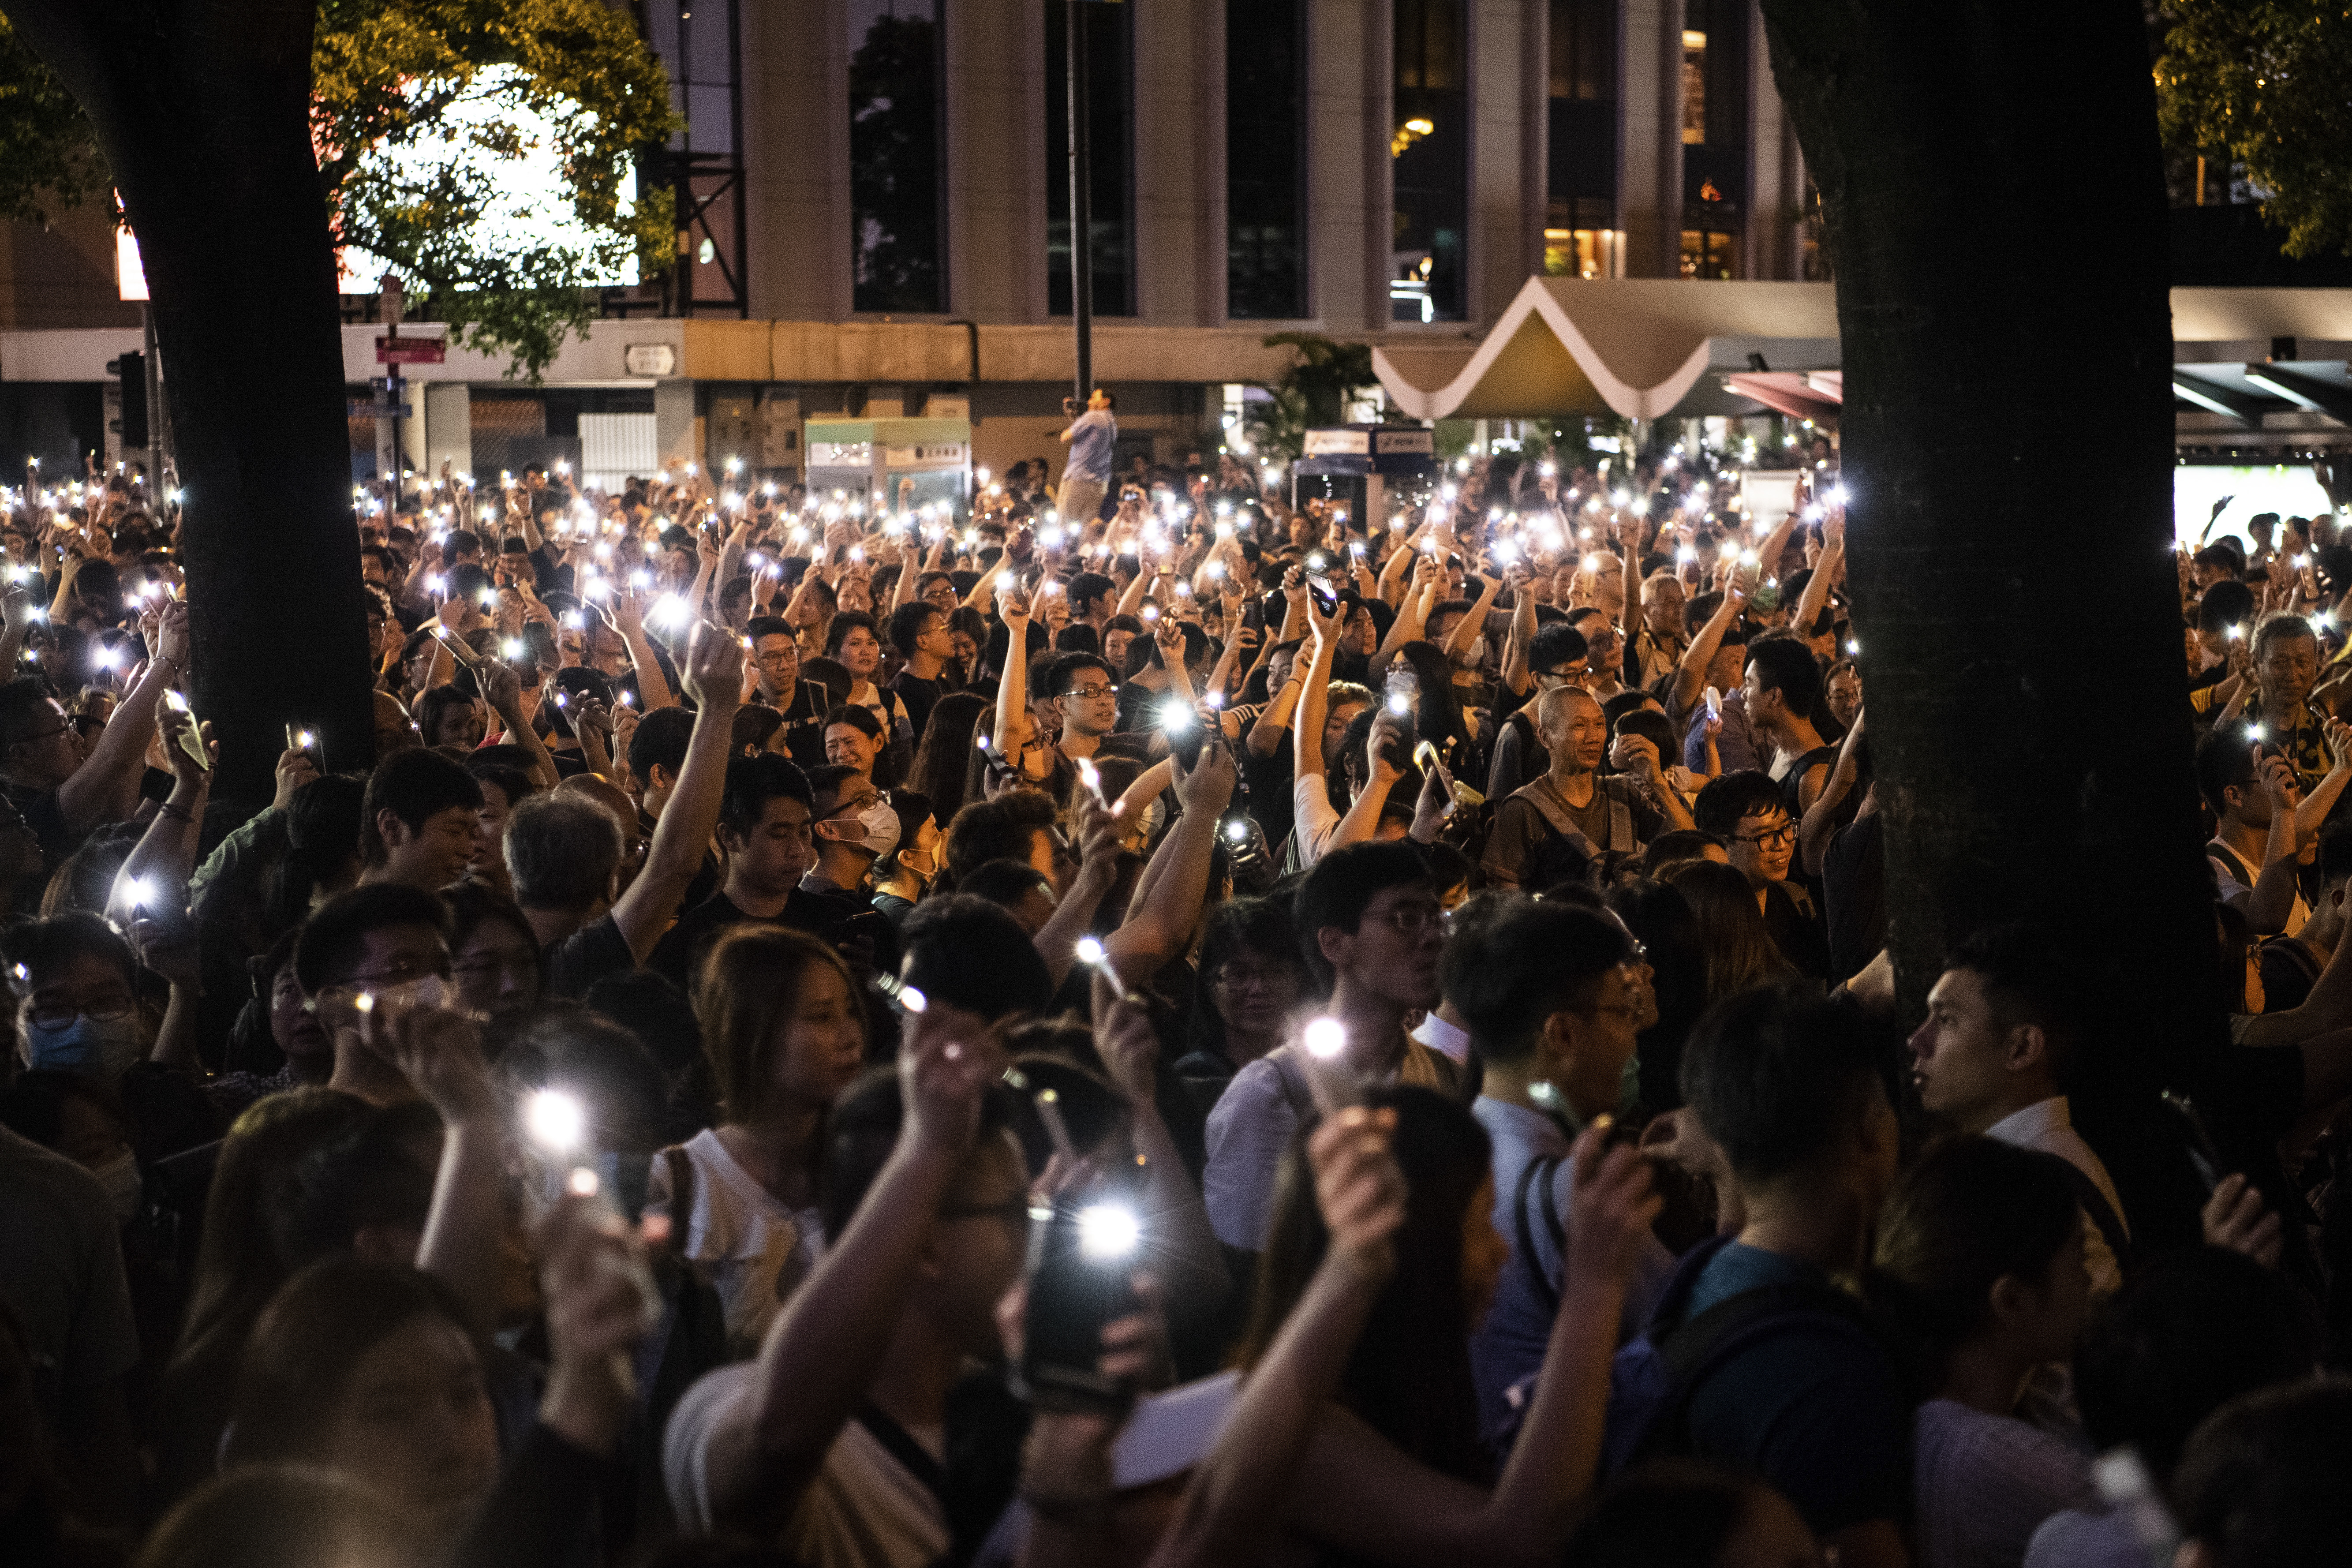 People wave their cell phone lights at a protest held by civil servants in the Central District of Hong Kong on August 2, 2019, in the latest opposition to a planned extradition law that was quickly evolved into a wider movement for democratic reforms. - Hong Kong civil servants on August 2 night kicked off a weekend of anti-government protests and unsanctioned rallies in defiance of warnings from China and after a prominent independence campaigner was arrested. (Photo by Laurel Chor / AFP)